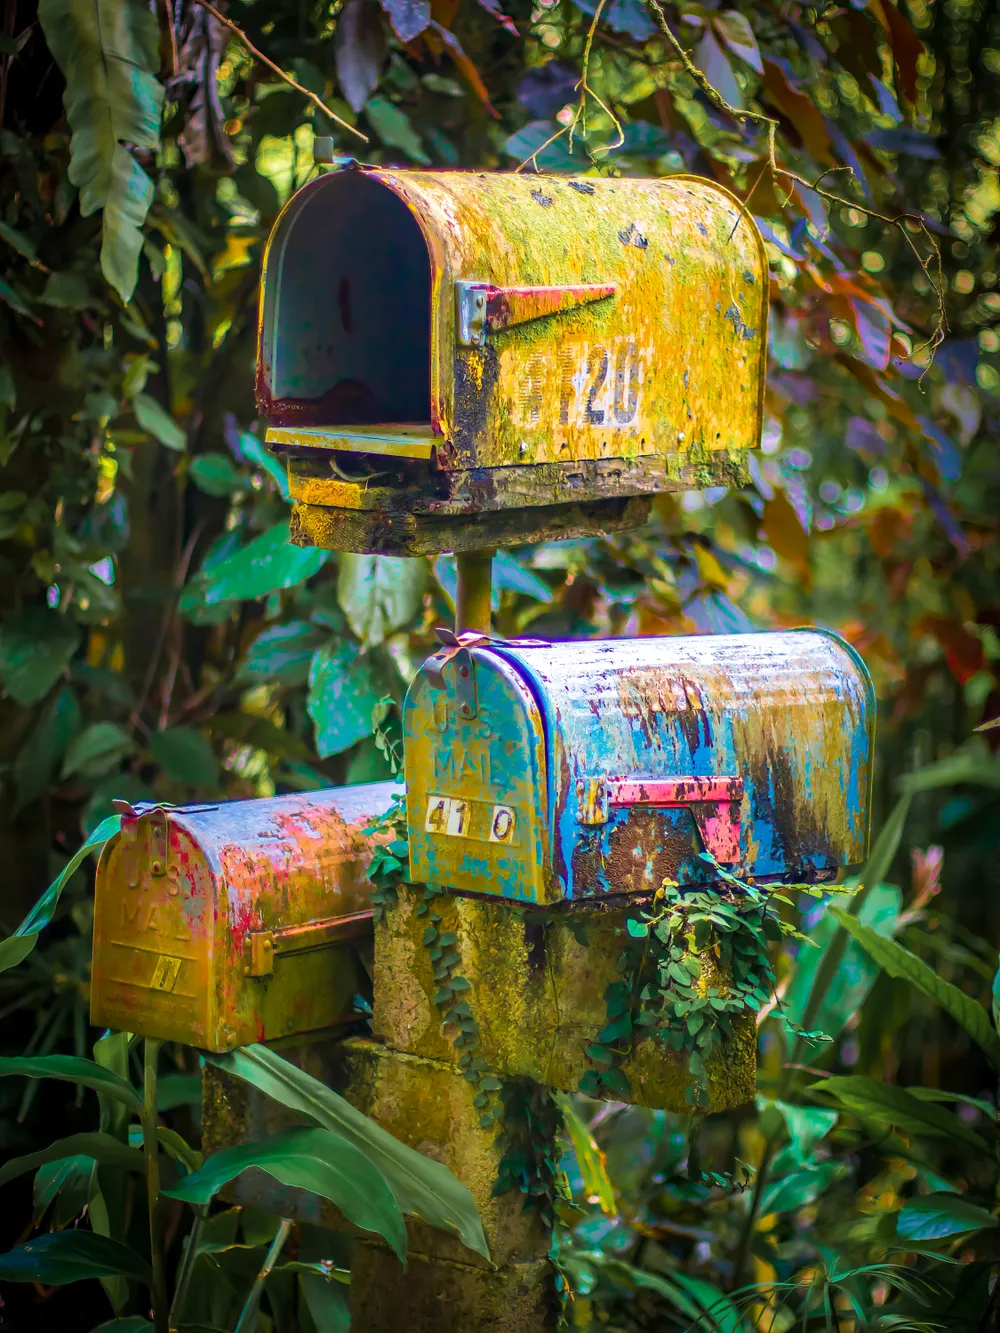 Mailboxes and mildew, quite a colorful combination.